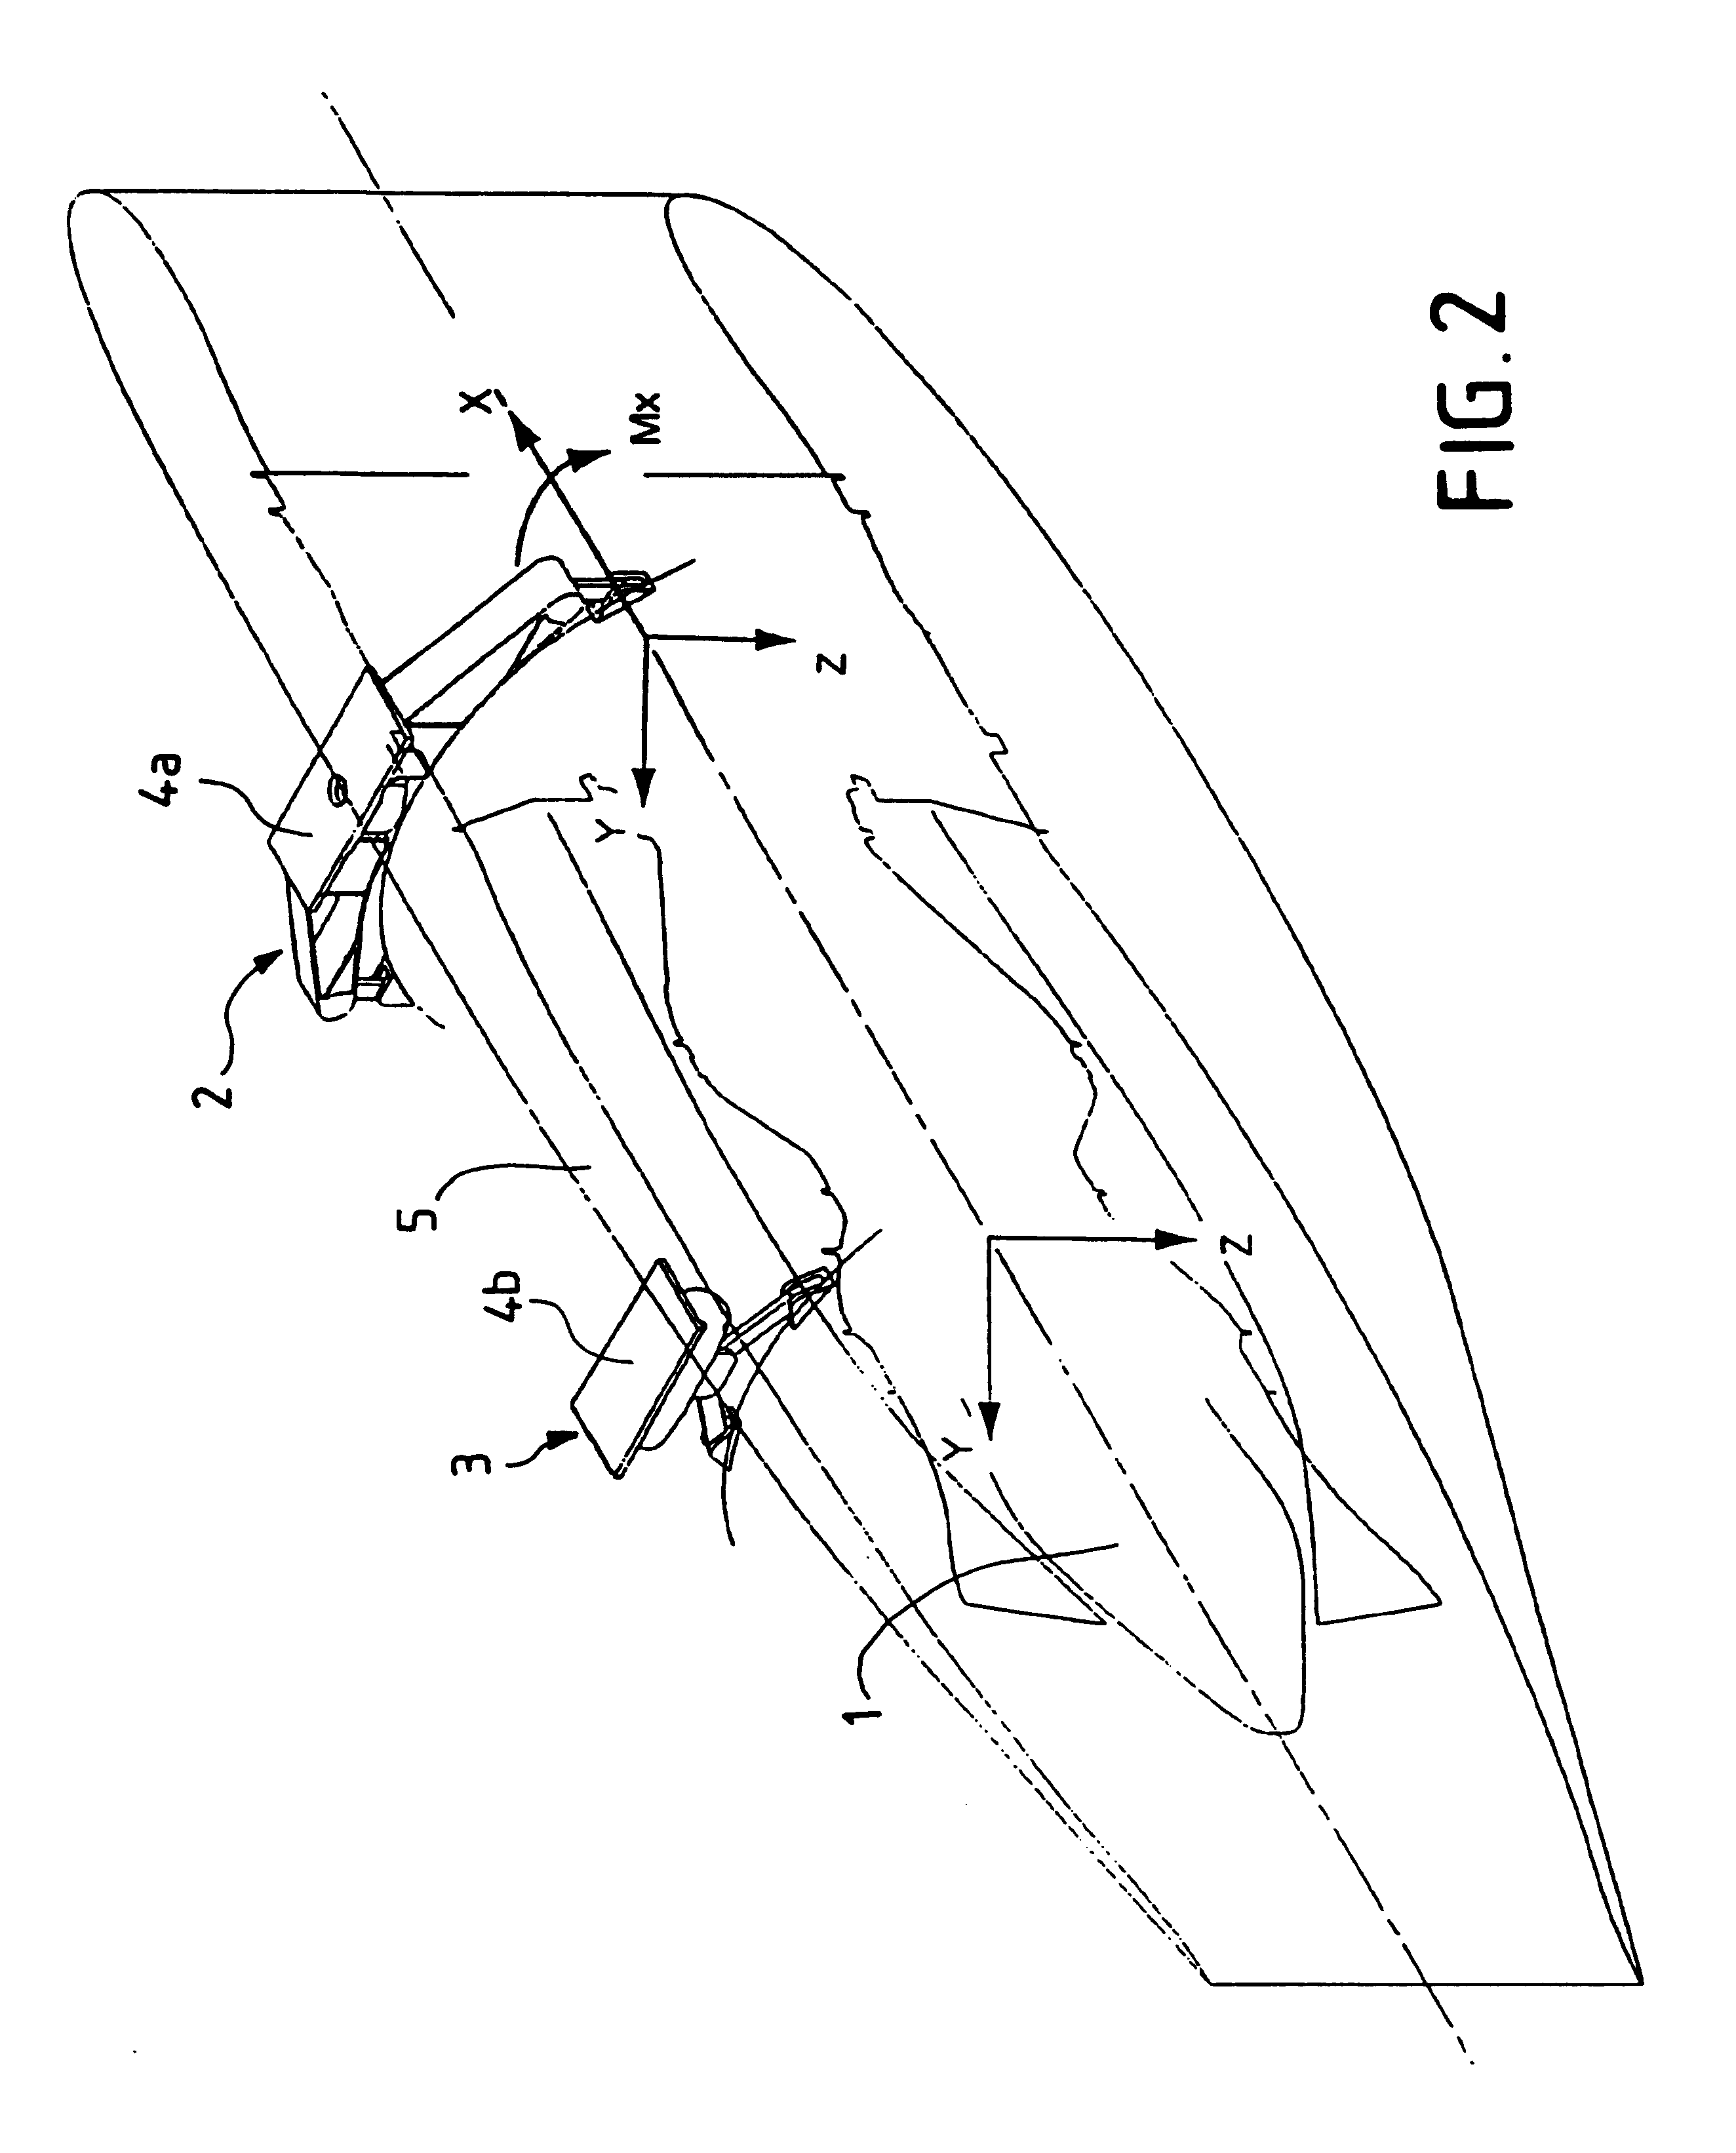 Suspension system with intrinsic safety features for aircraft powerplants